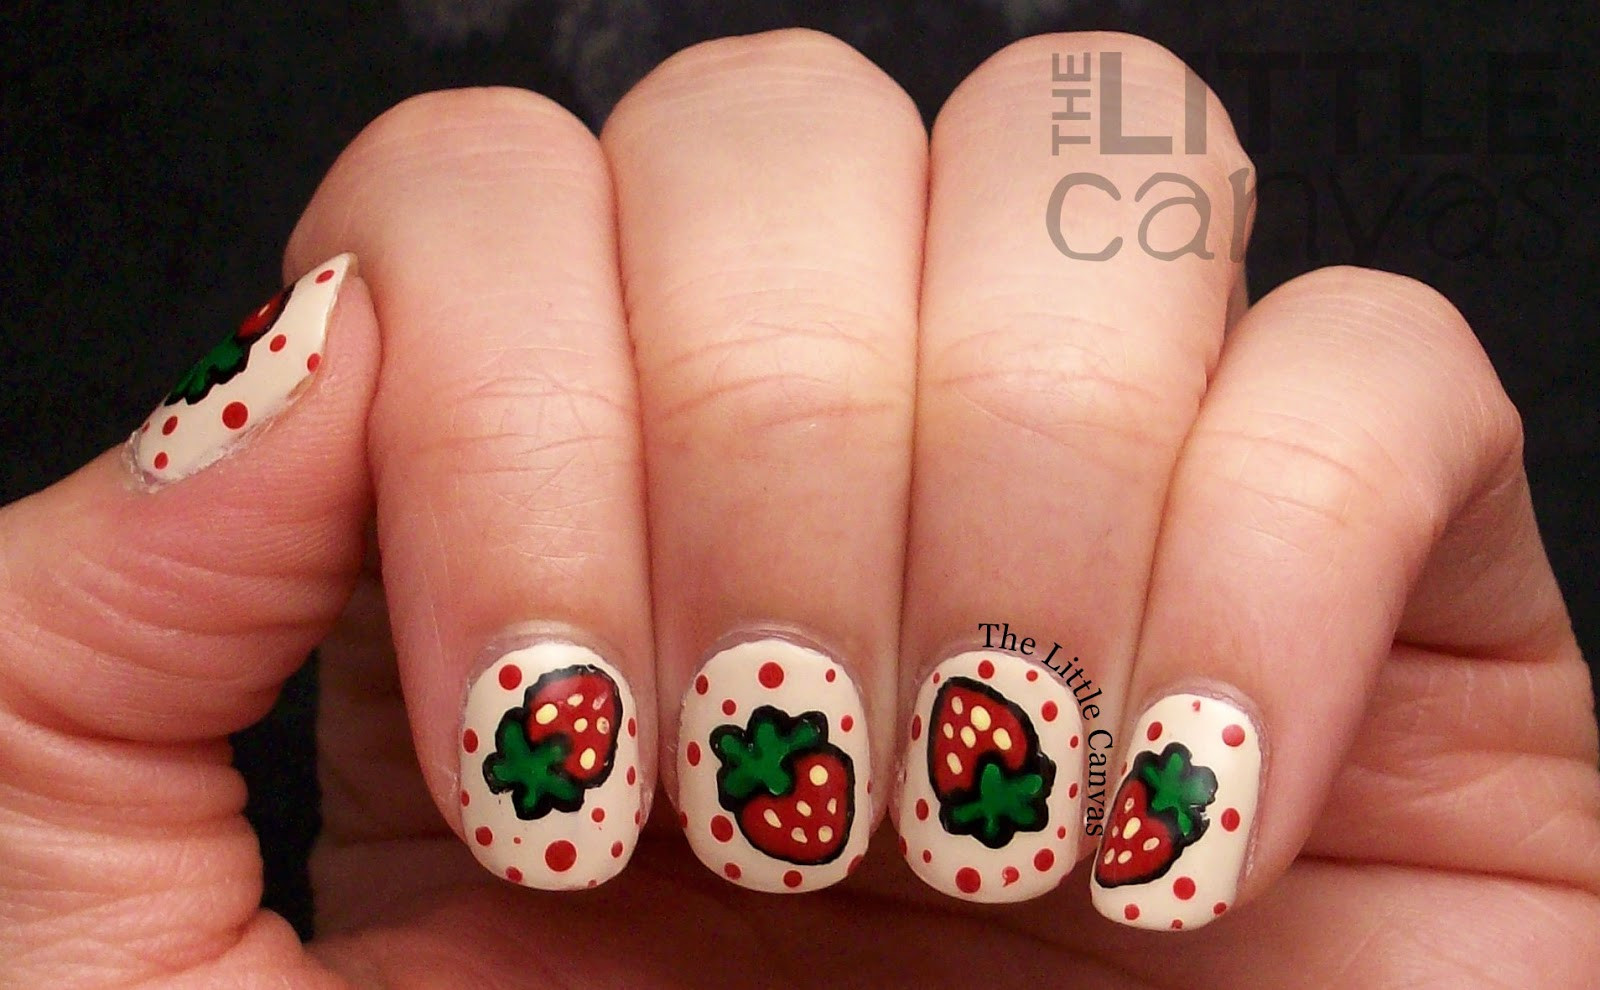 Strawberry Nail Designs
 Strawberry Nail Art Inspired by SimplyRins The Little Canvas